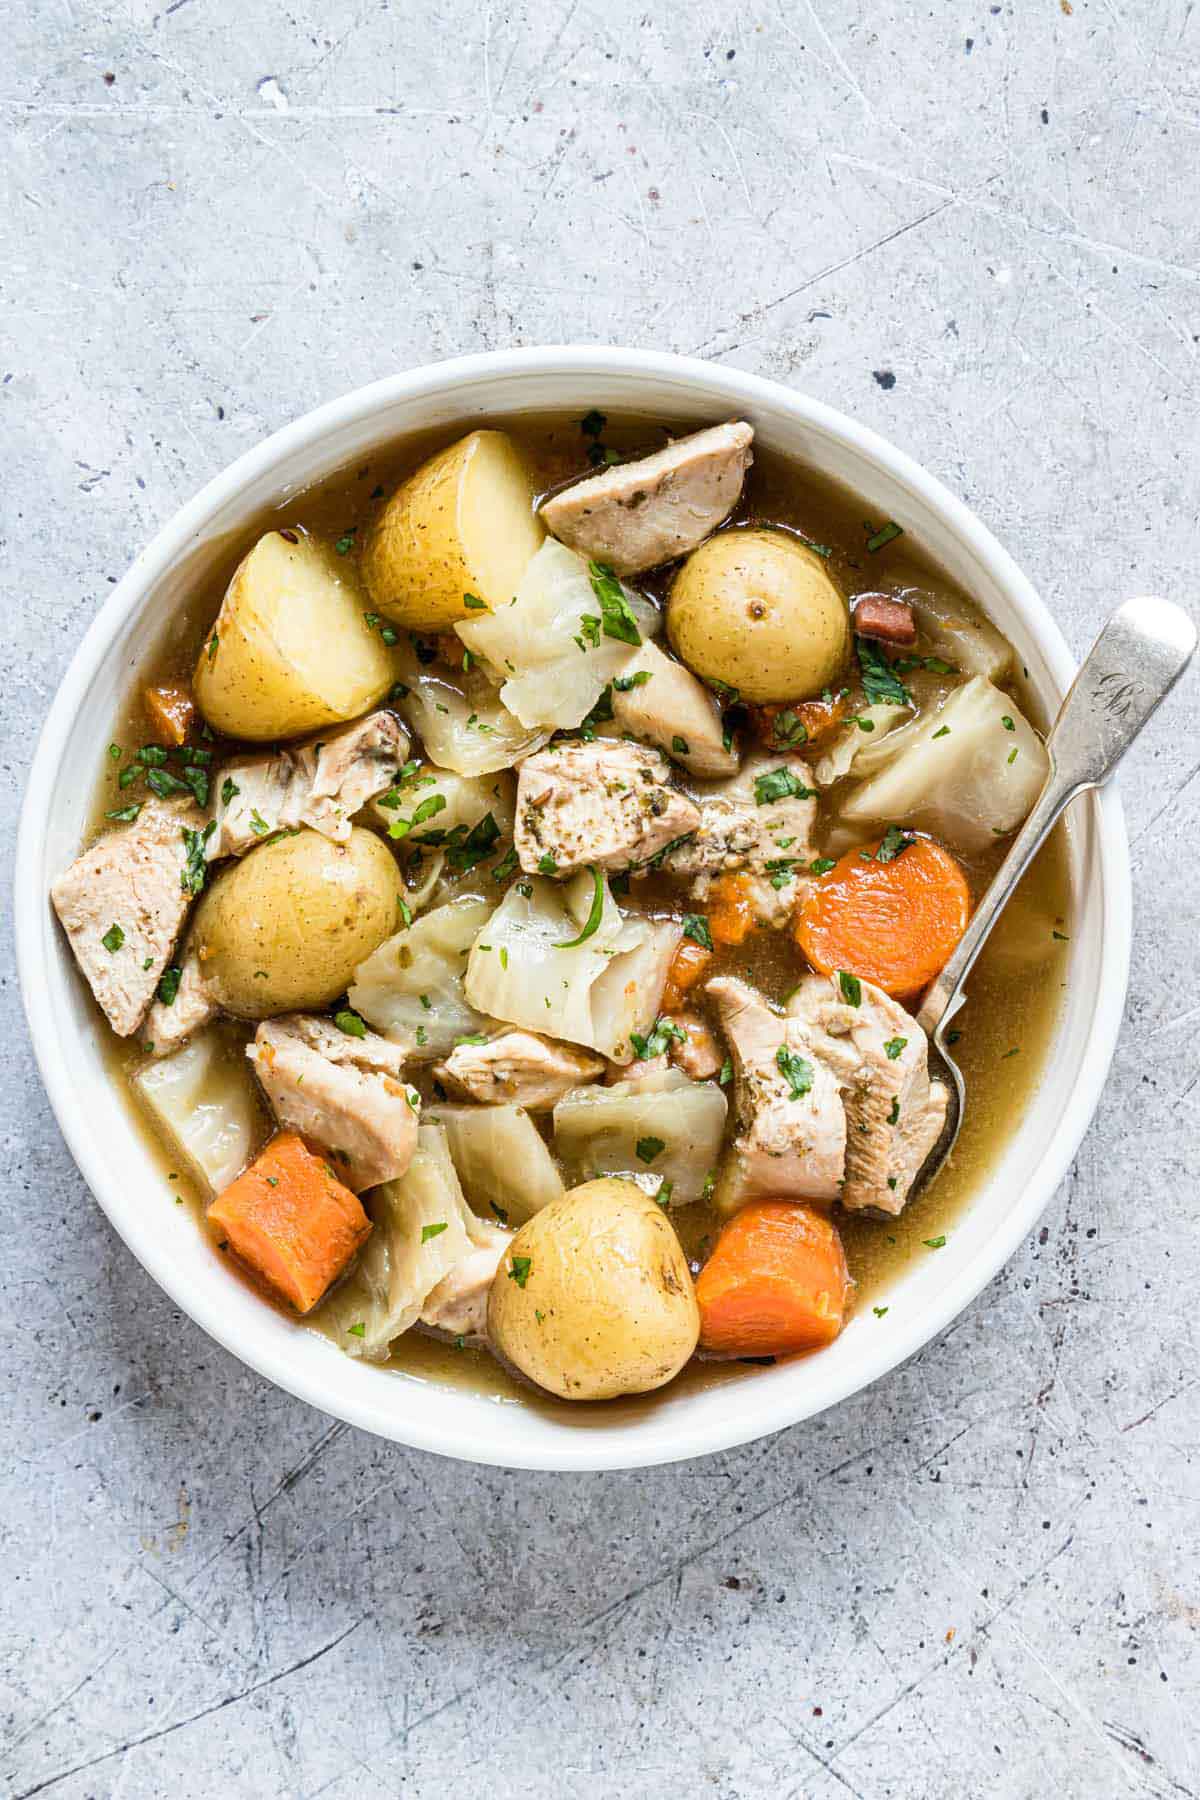 A bowl of chicken stew with potatoes and carrots on a table.